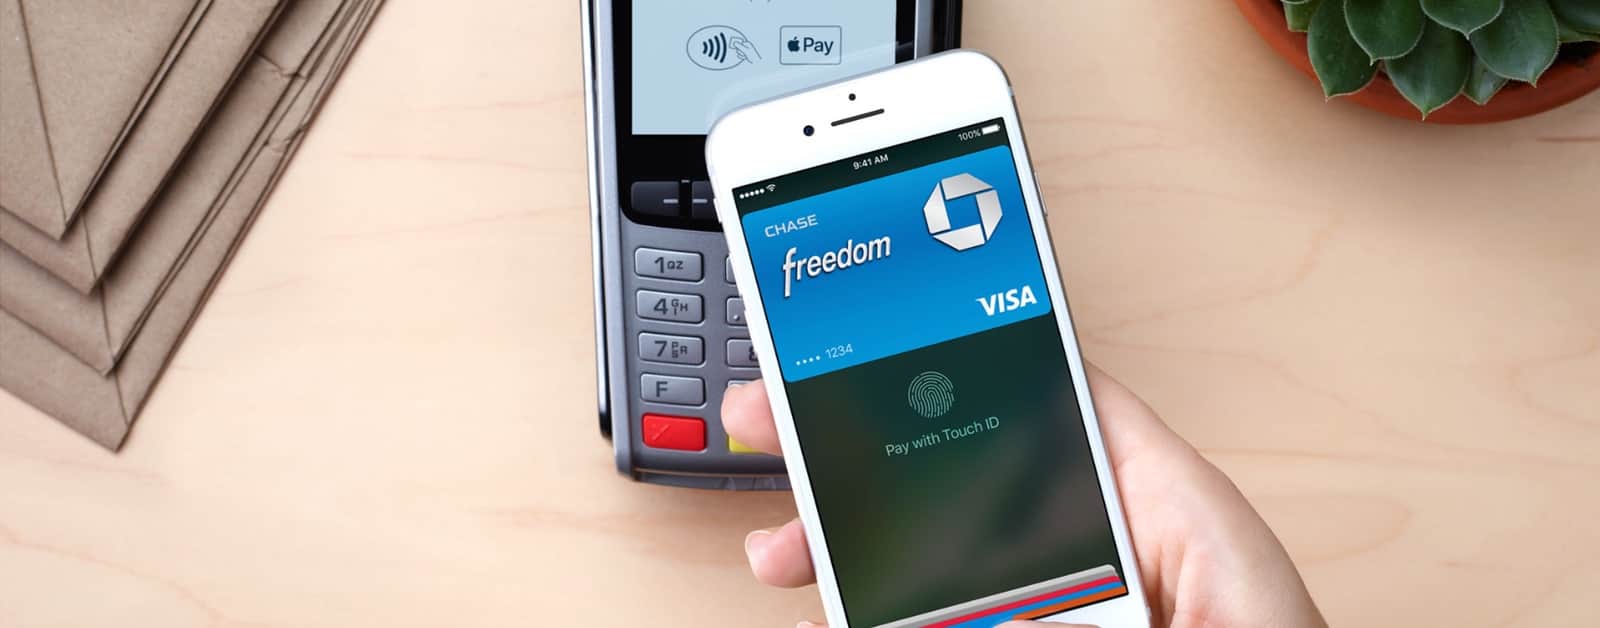 image of person using apple pay